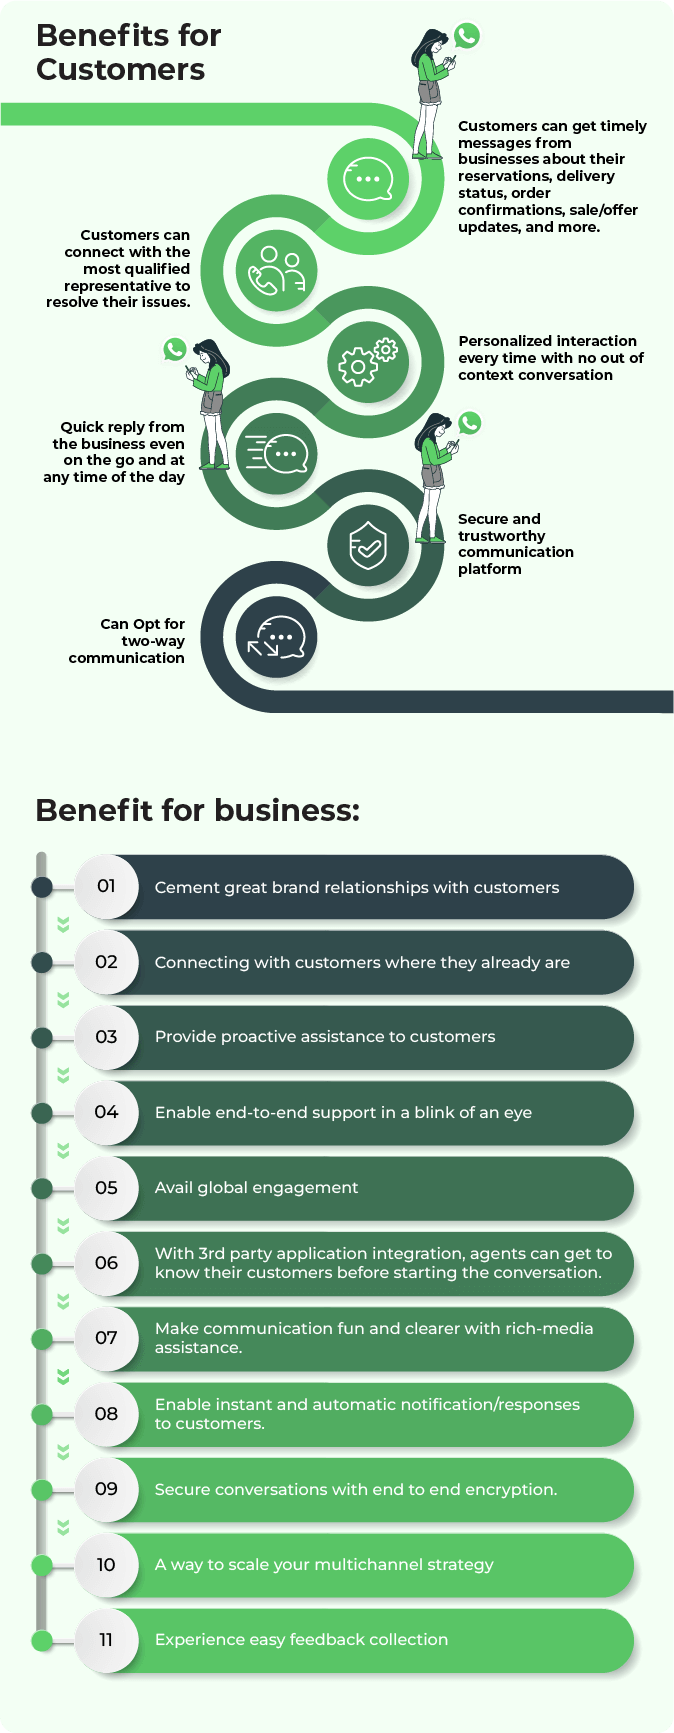 Whatsapp Benefits for Customers & Businesses